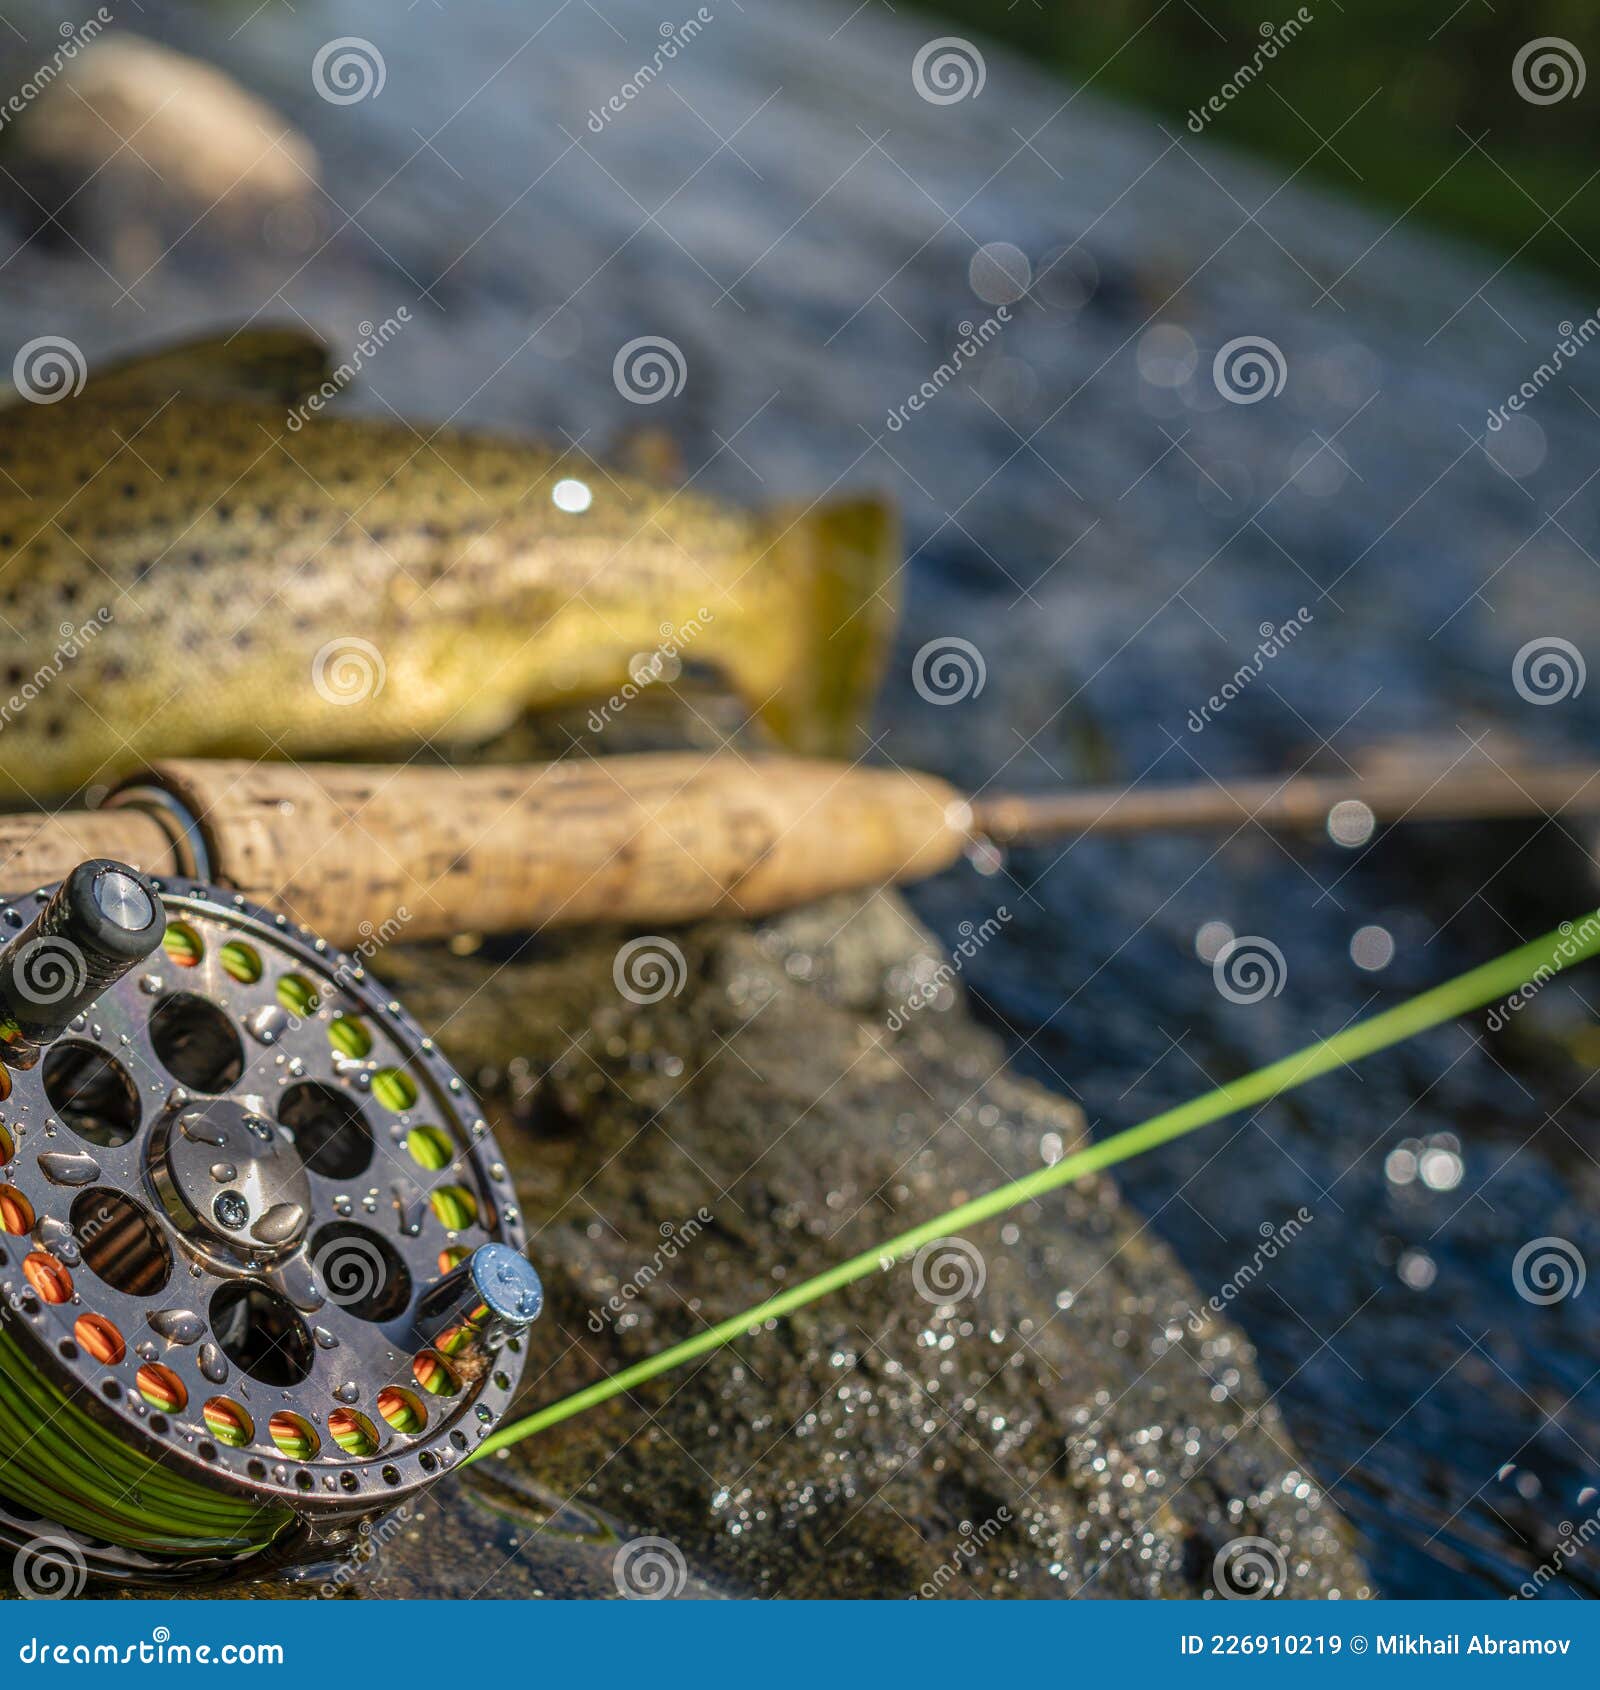 A Fly Fishing Rod and Reel on the River Bank. Trout Fishing. Stock